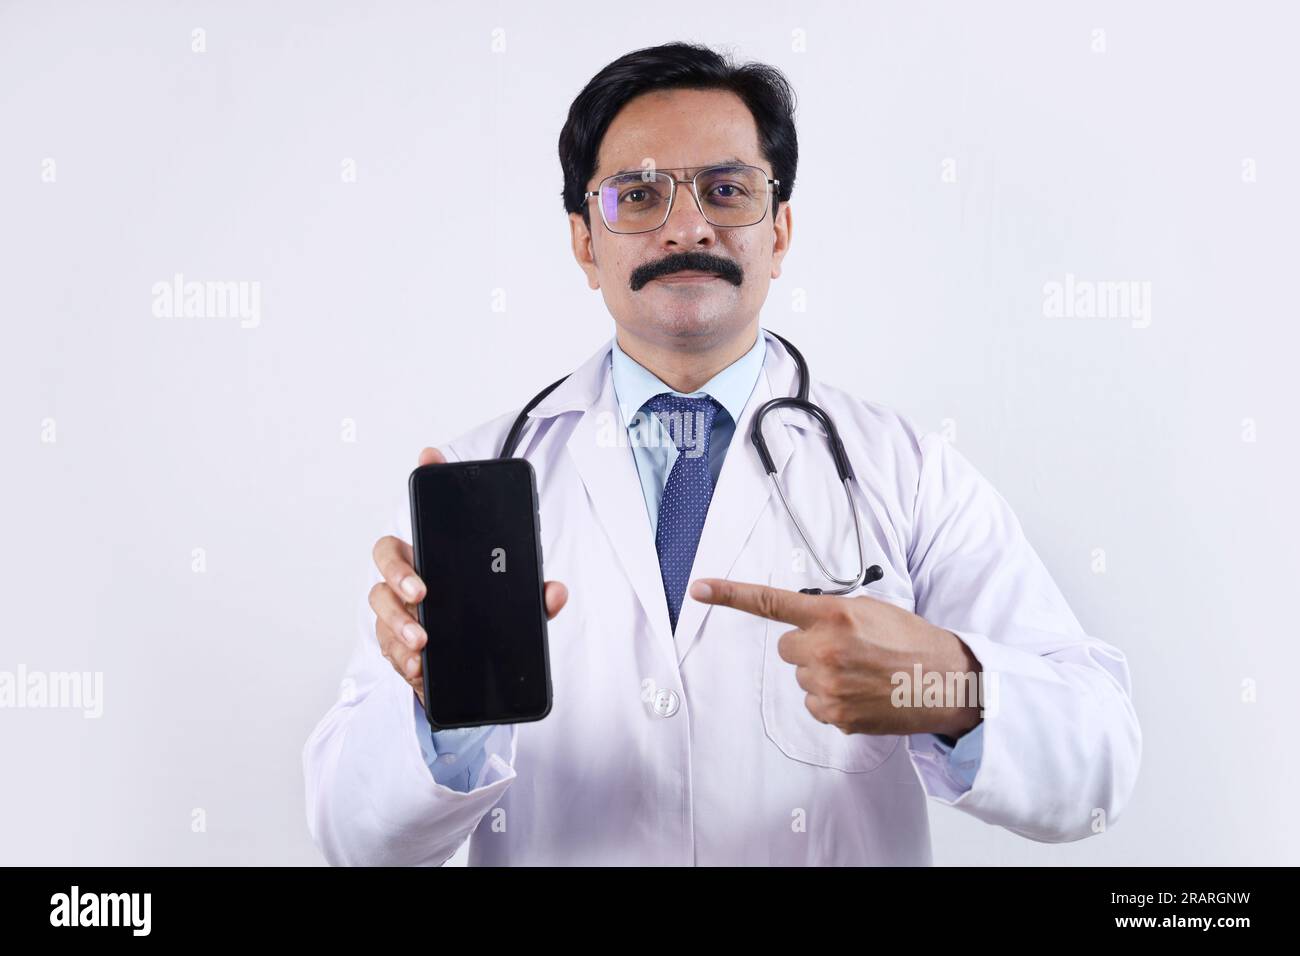 Beautiful portrait of happy Indian doctor in uniform wearing stethoscope and specs showing phone screen in hand. Showing mobile app. Stock Photo